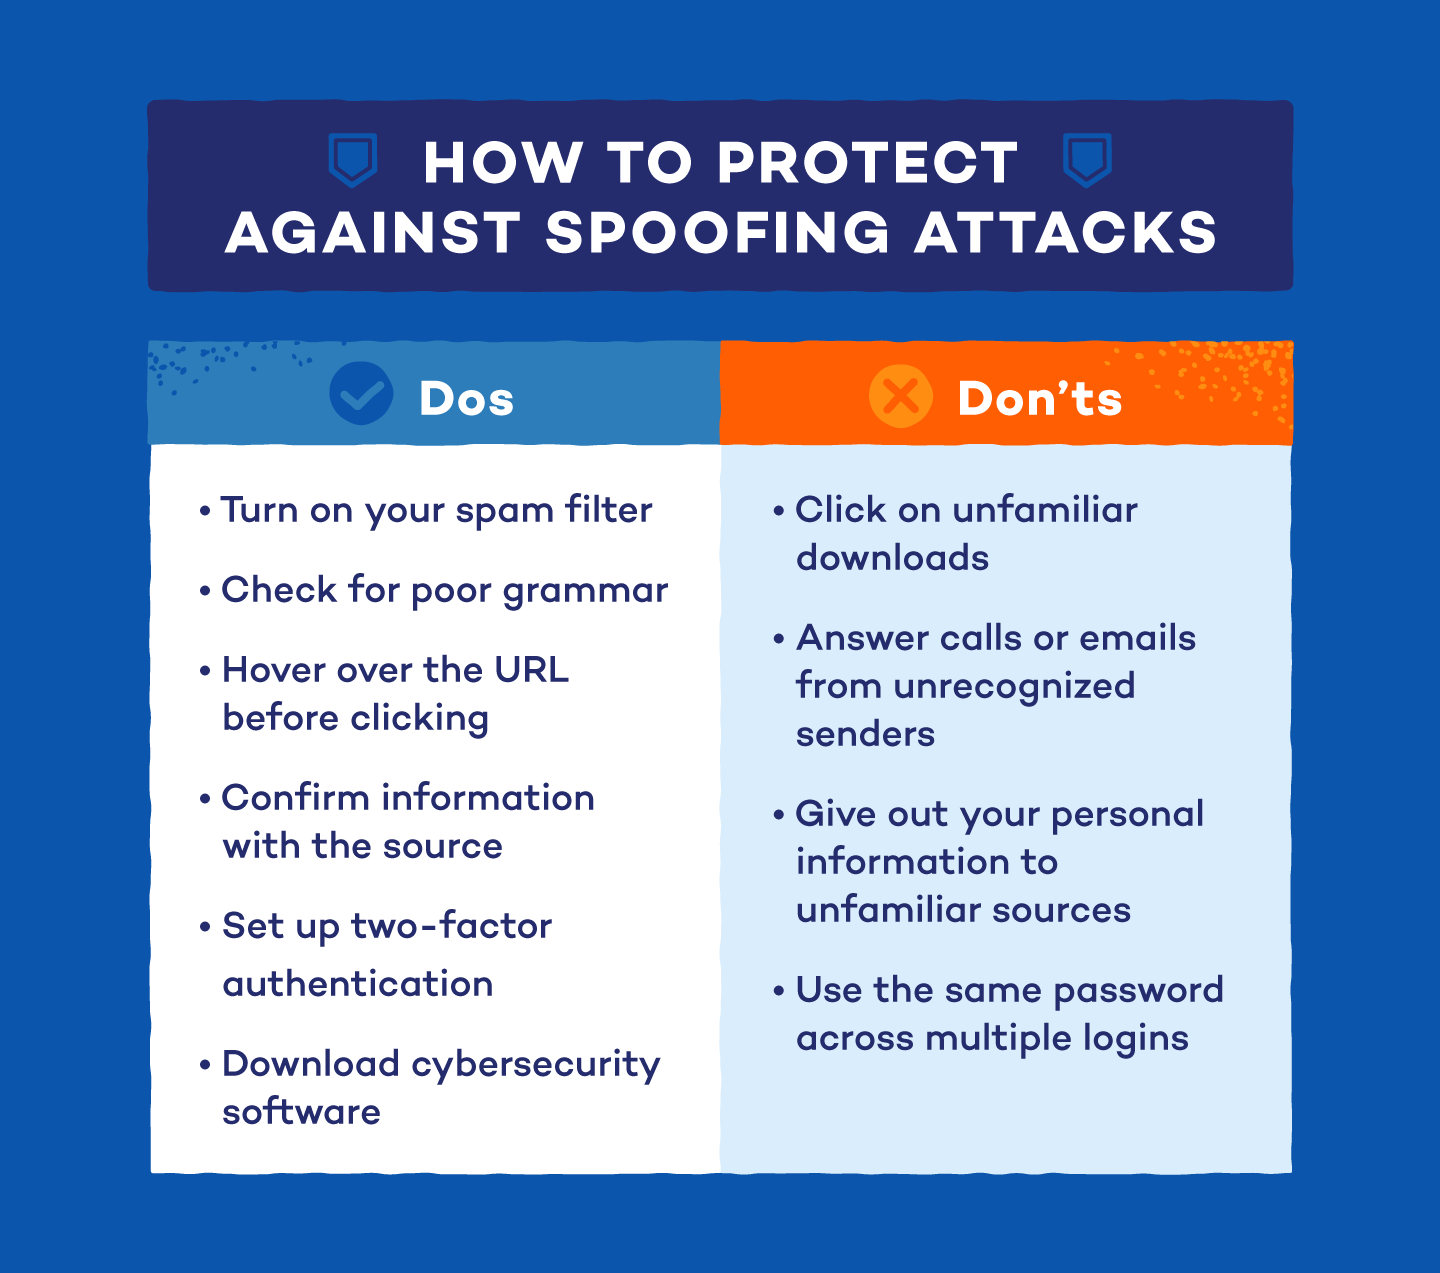 An illustration walking through how to protect against spoofing